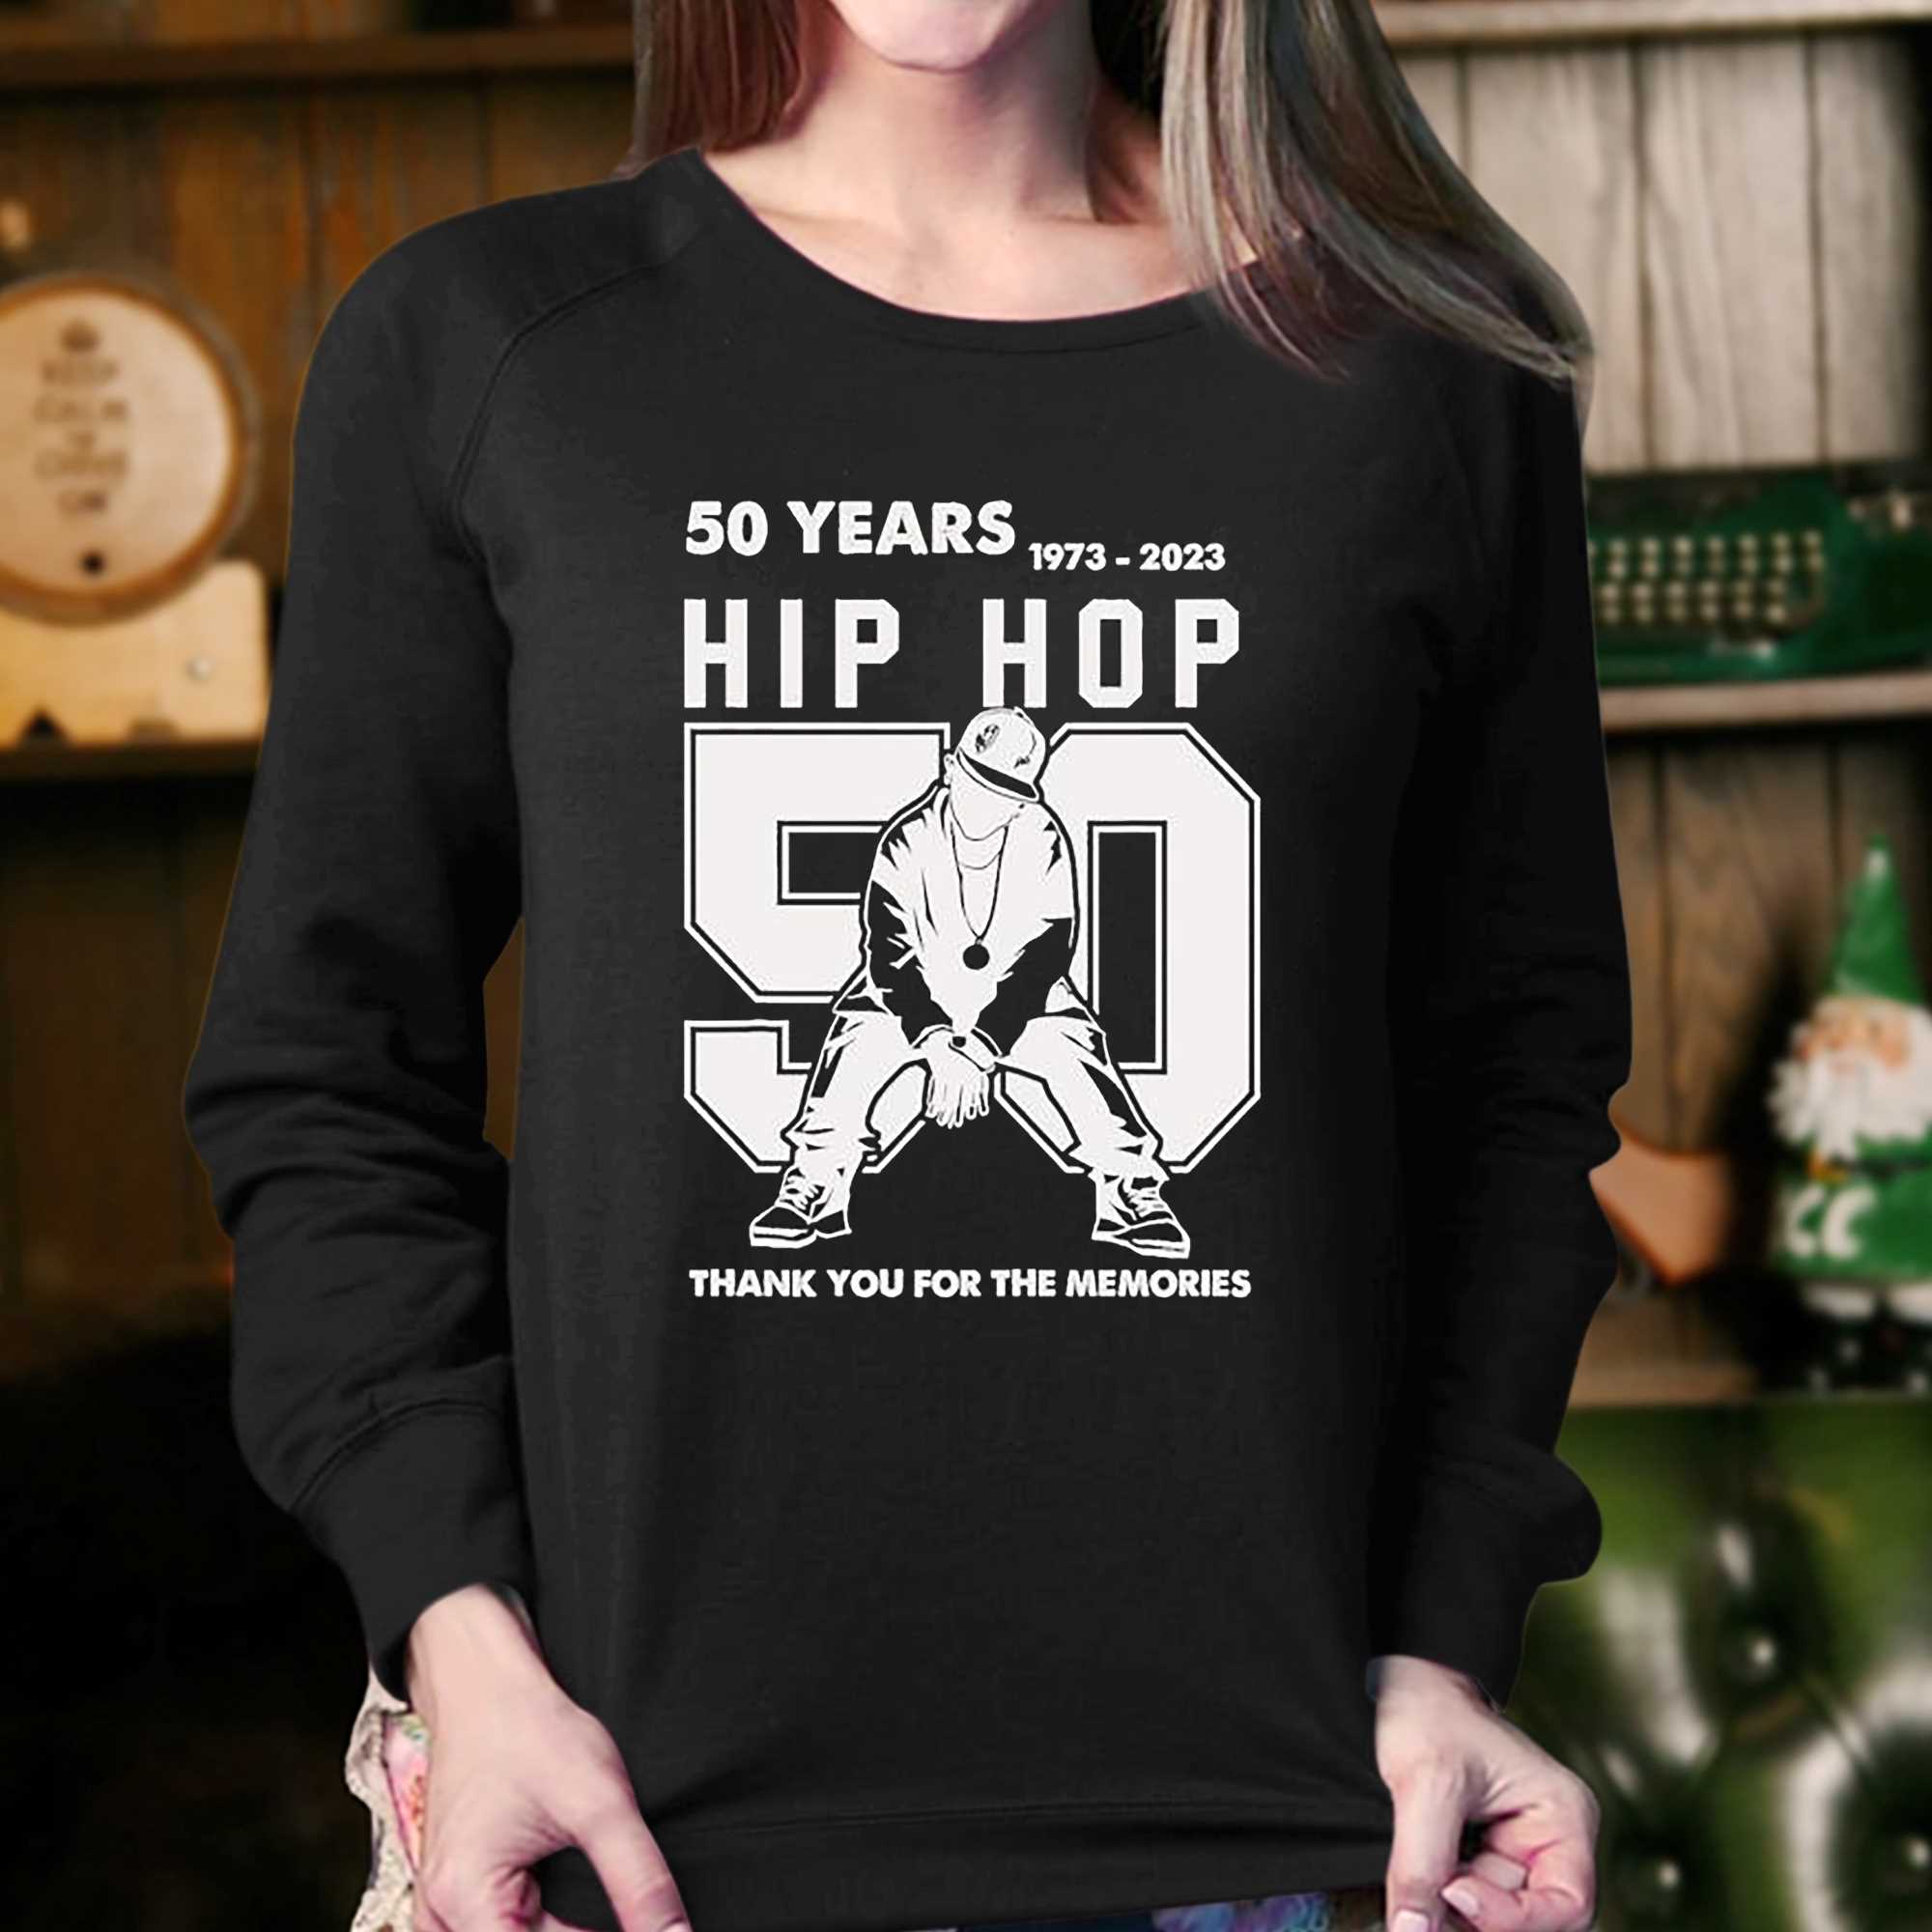 50 Years Of Hip Hop 1973-2023 50th Thank You For Memories Hip Hop T- shirt - Shibtee Clothing